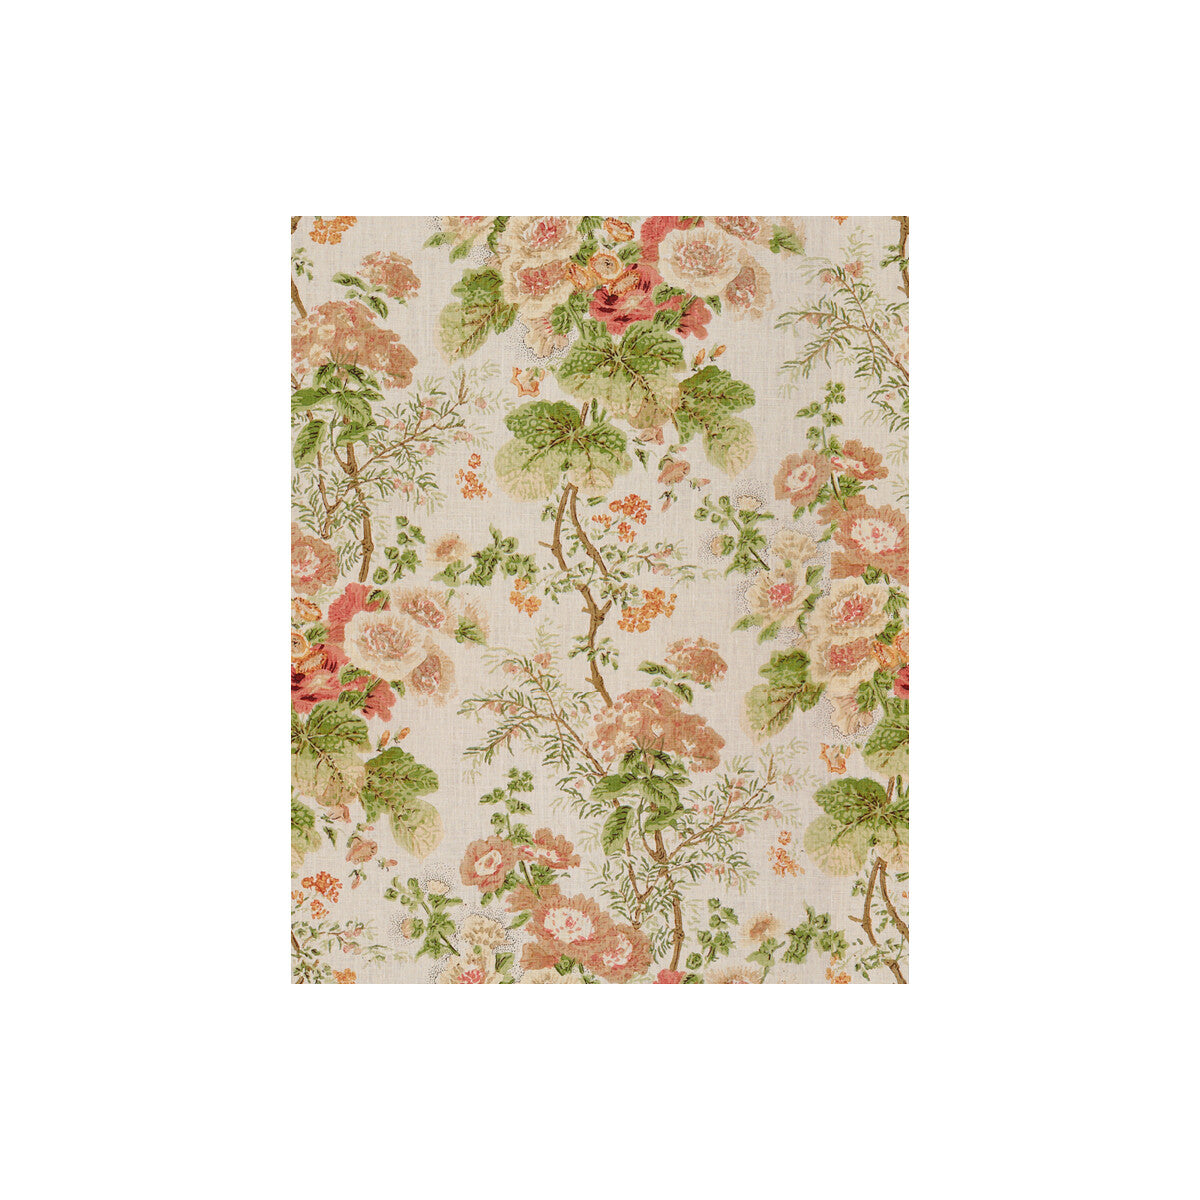 Hollyhock Hdb fabric in coral/apple color - pattern 2011118.73.0 - by Lee Jofa